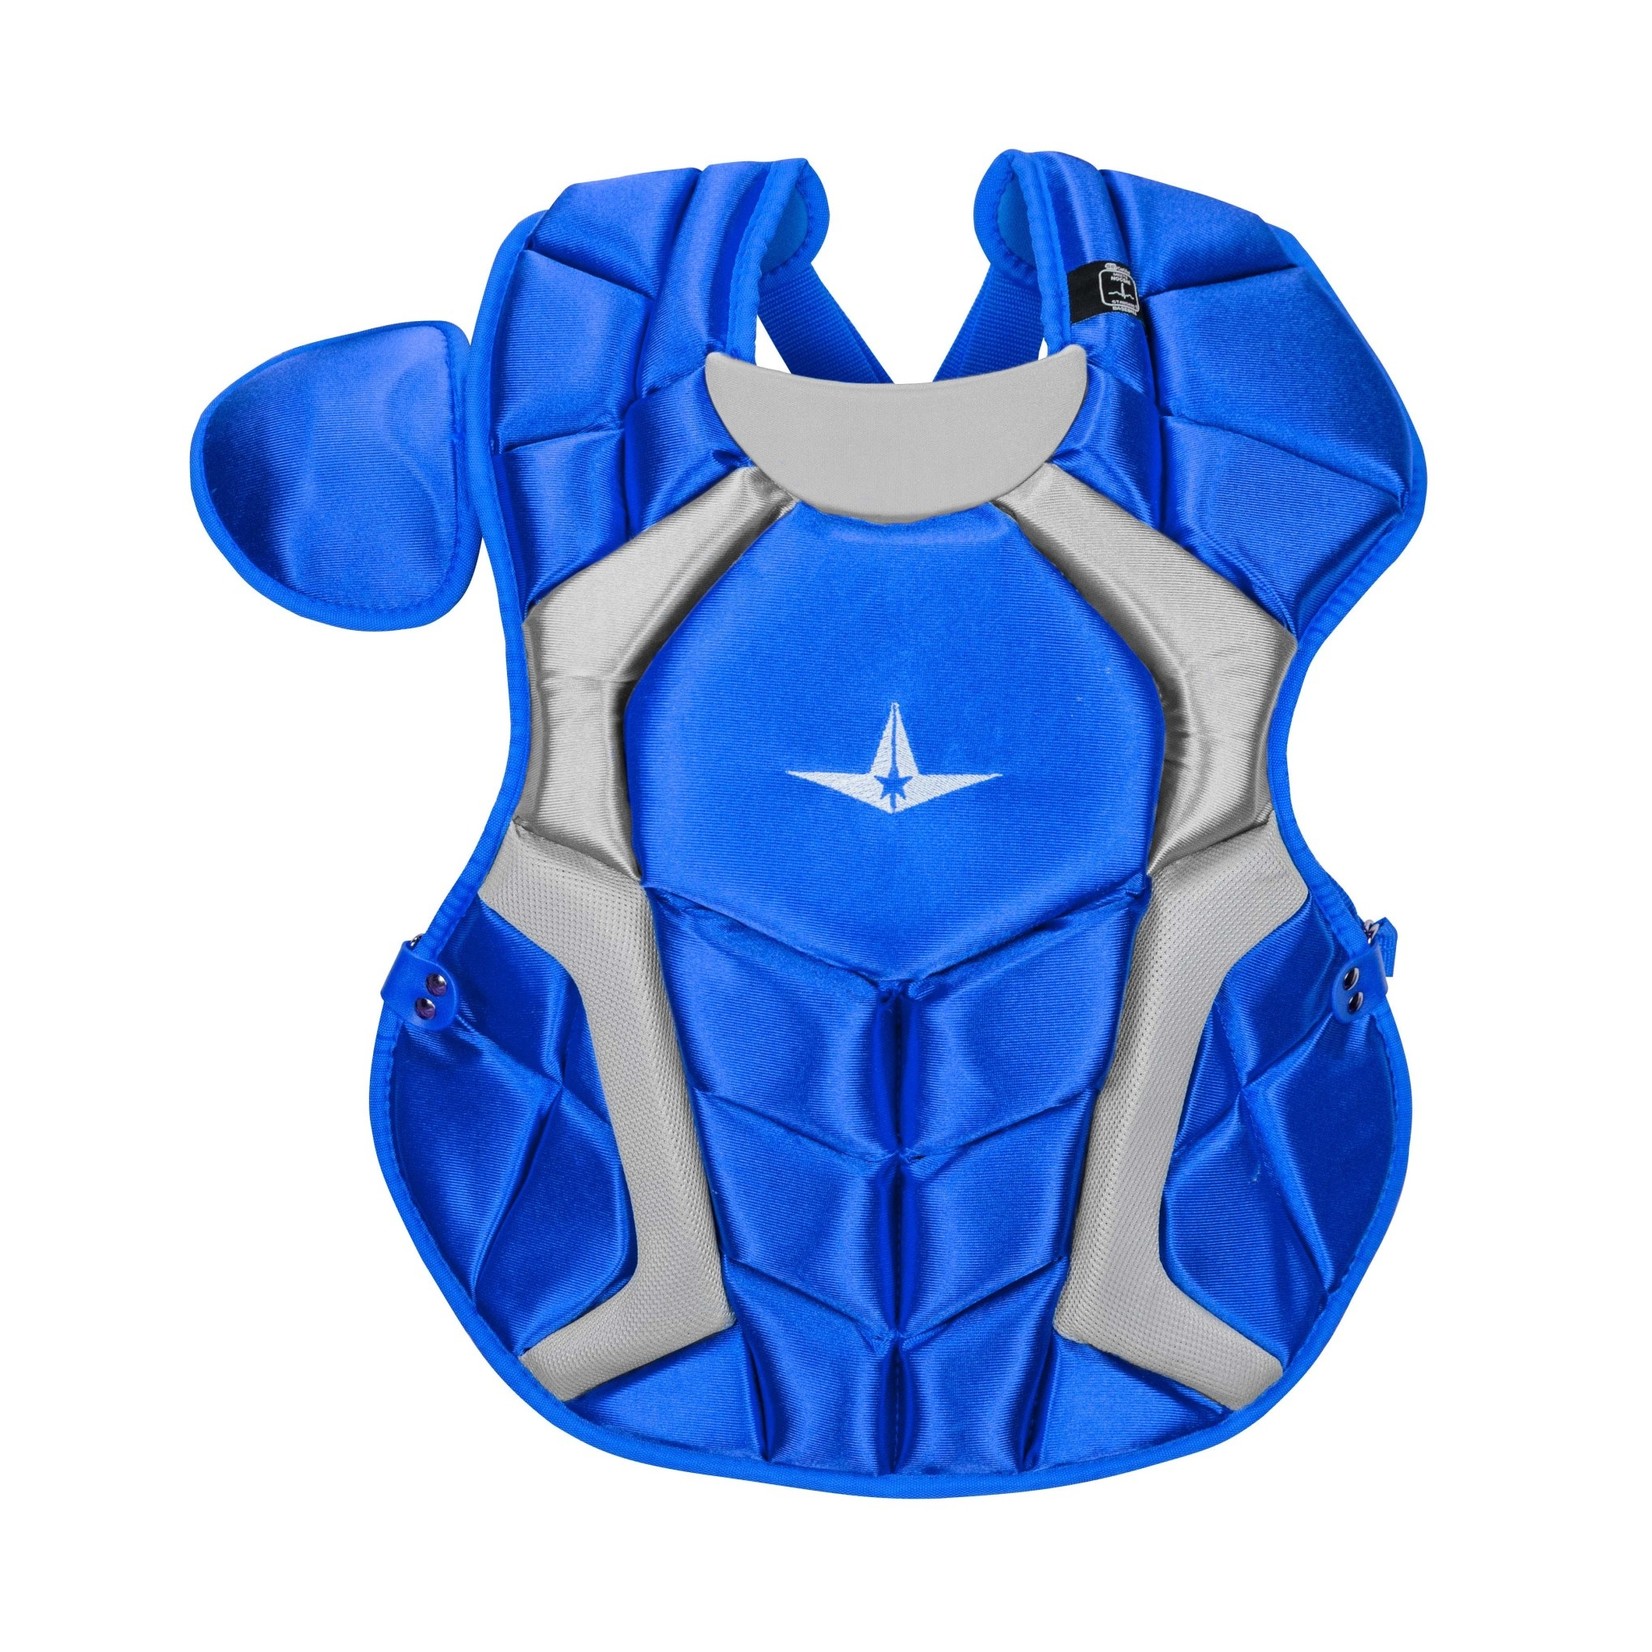 All-Star All Star Player’s Series Chest Protector Youth Royal